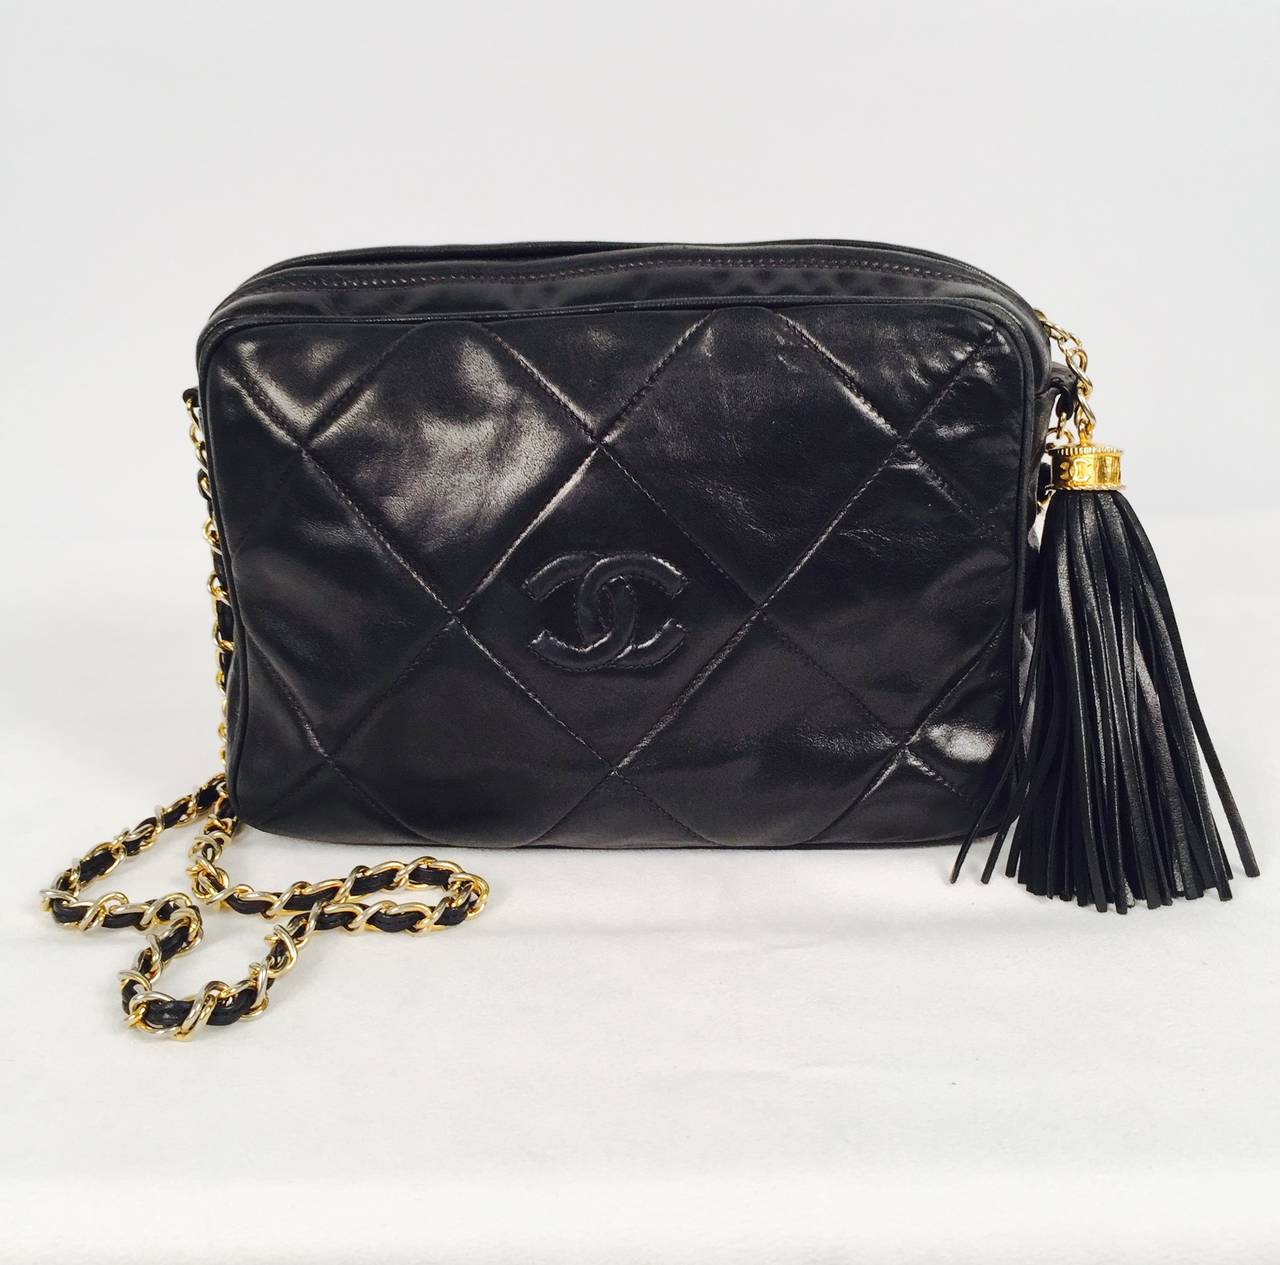 Vintage 1980s Chanel Black Quilted Lambskin Camera Bag With Tassel at 1stdibs